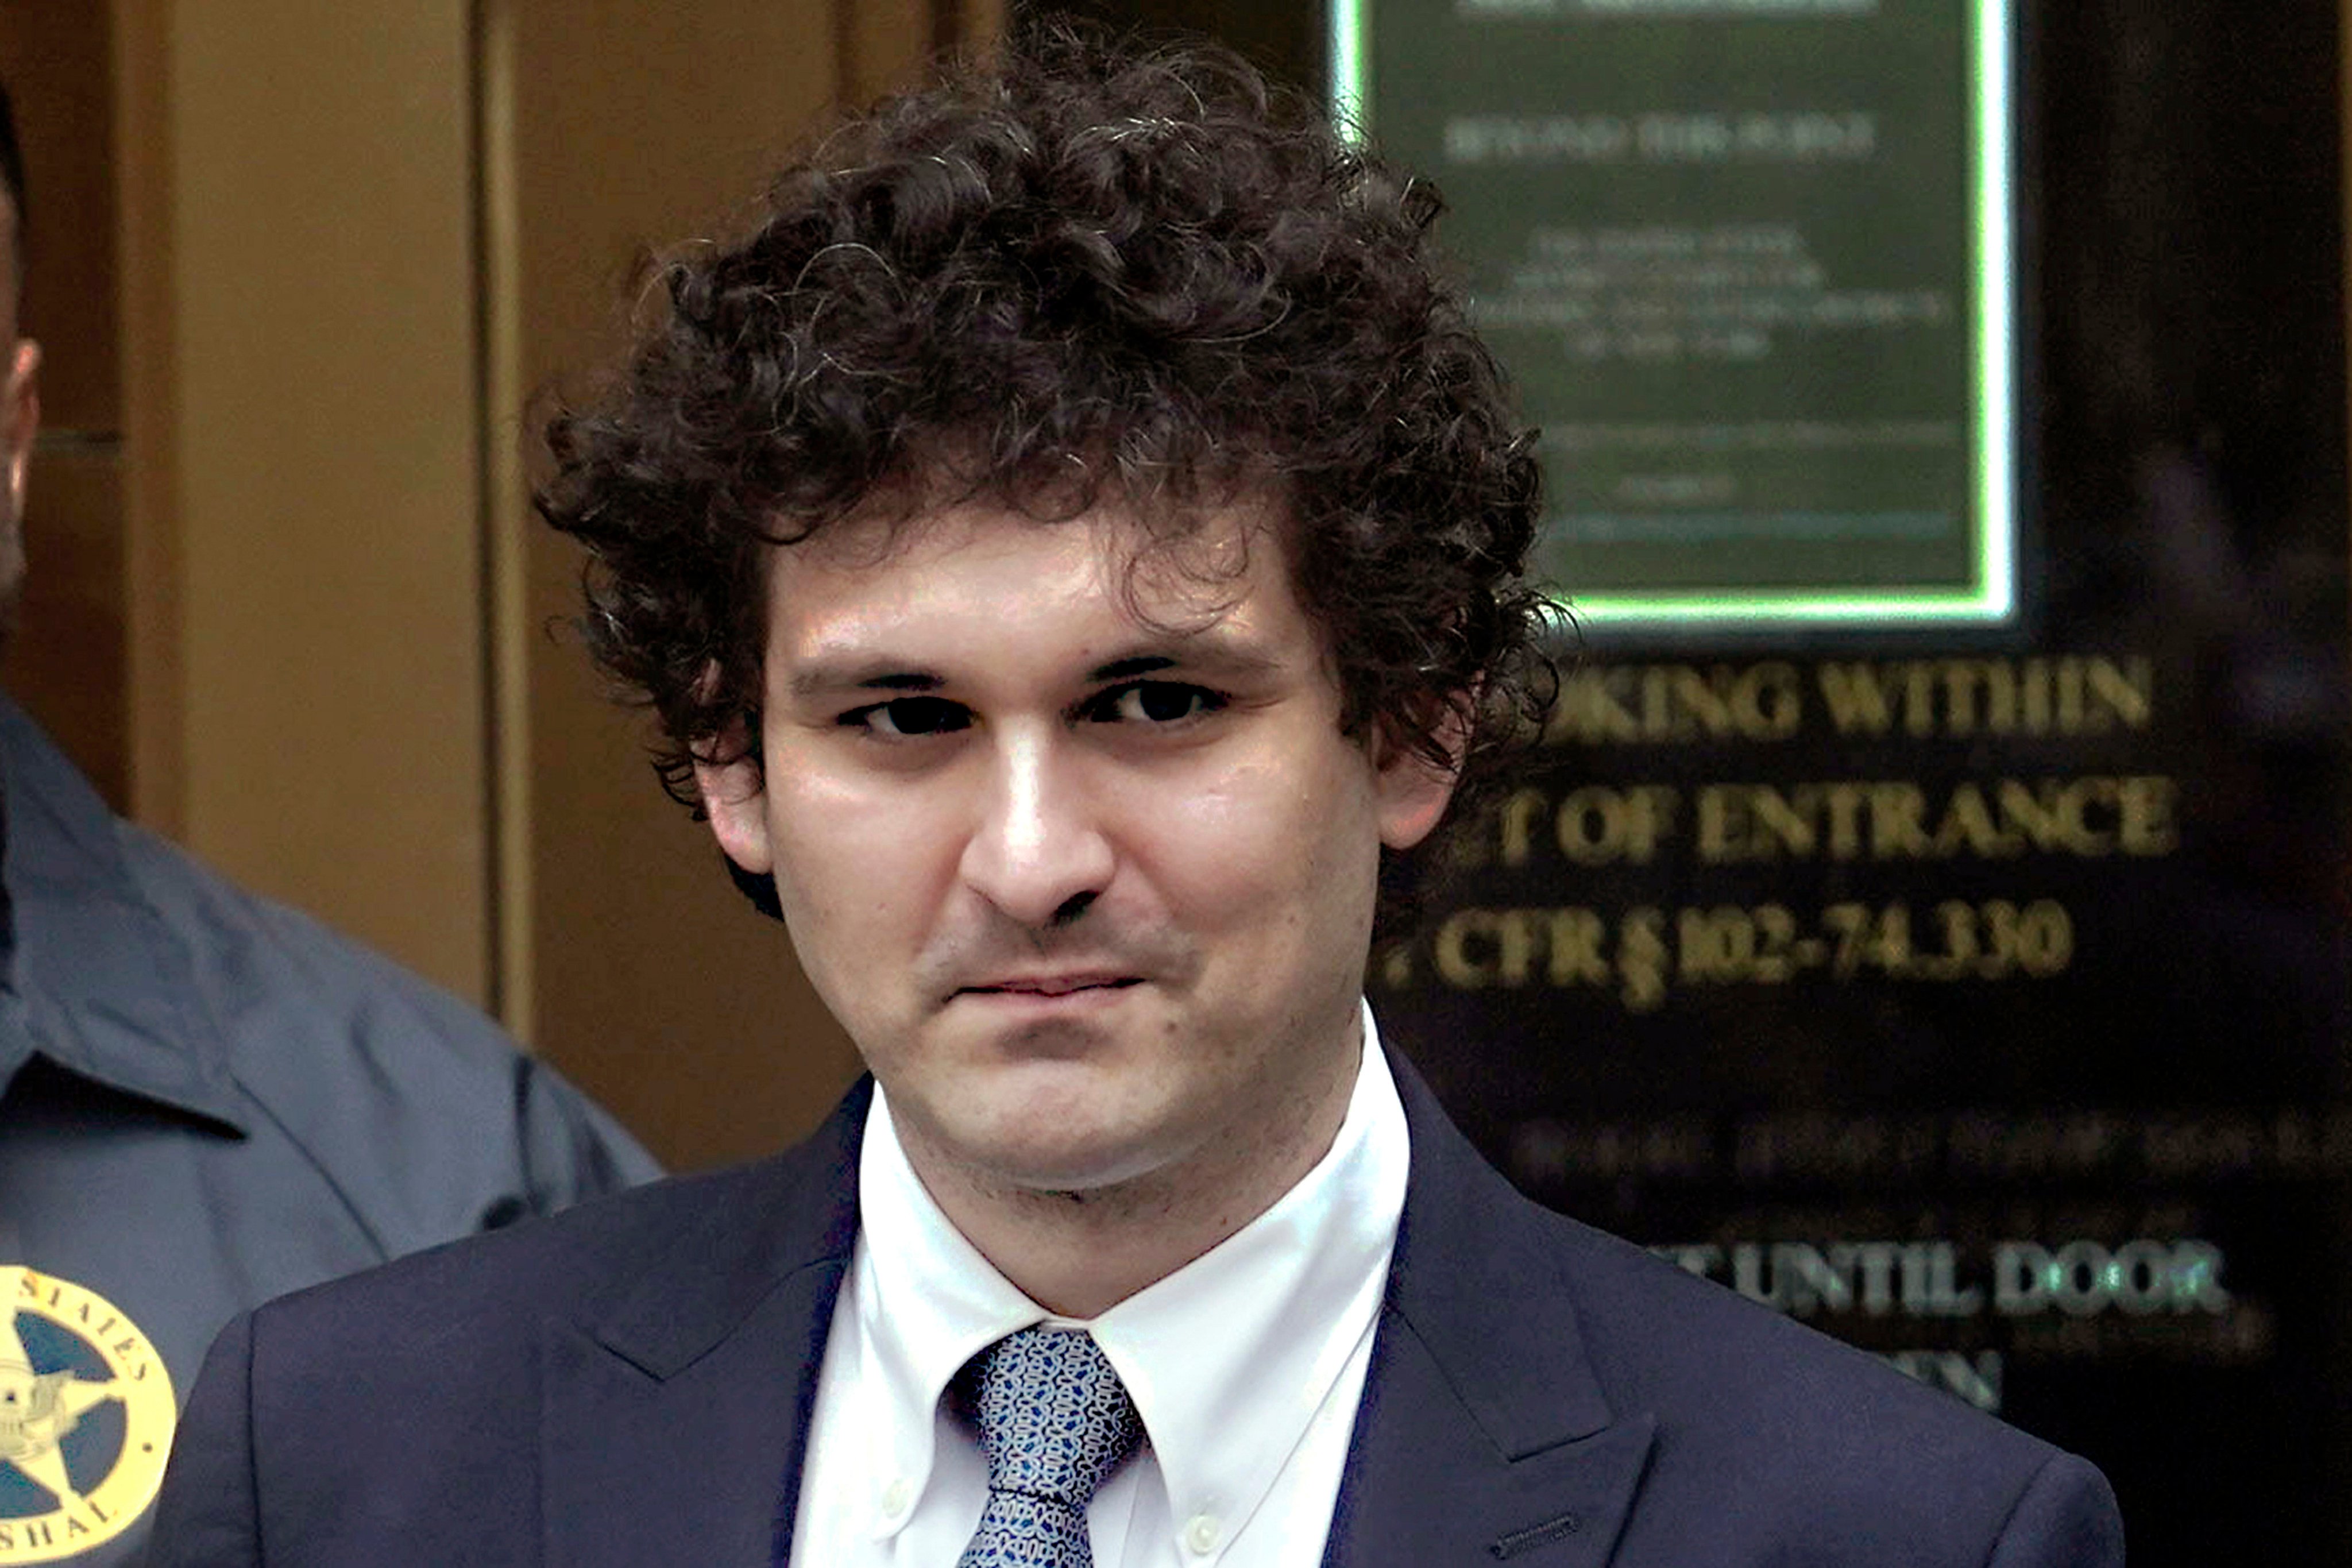 Sam Bankman-Fried, founder and former chief executive of cryptocurrency exchange FTX, has been charged with seven counts of fraud, embezzlement and criminal conspiracy, and if convicted could face more than 100 years in prison. Photo: AP